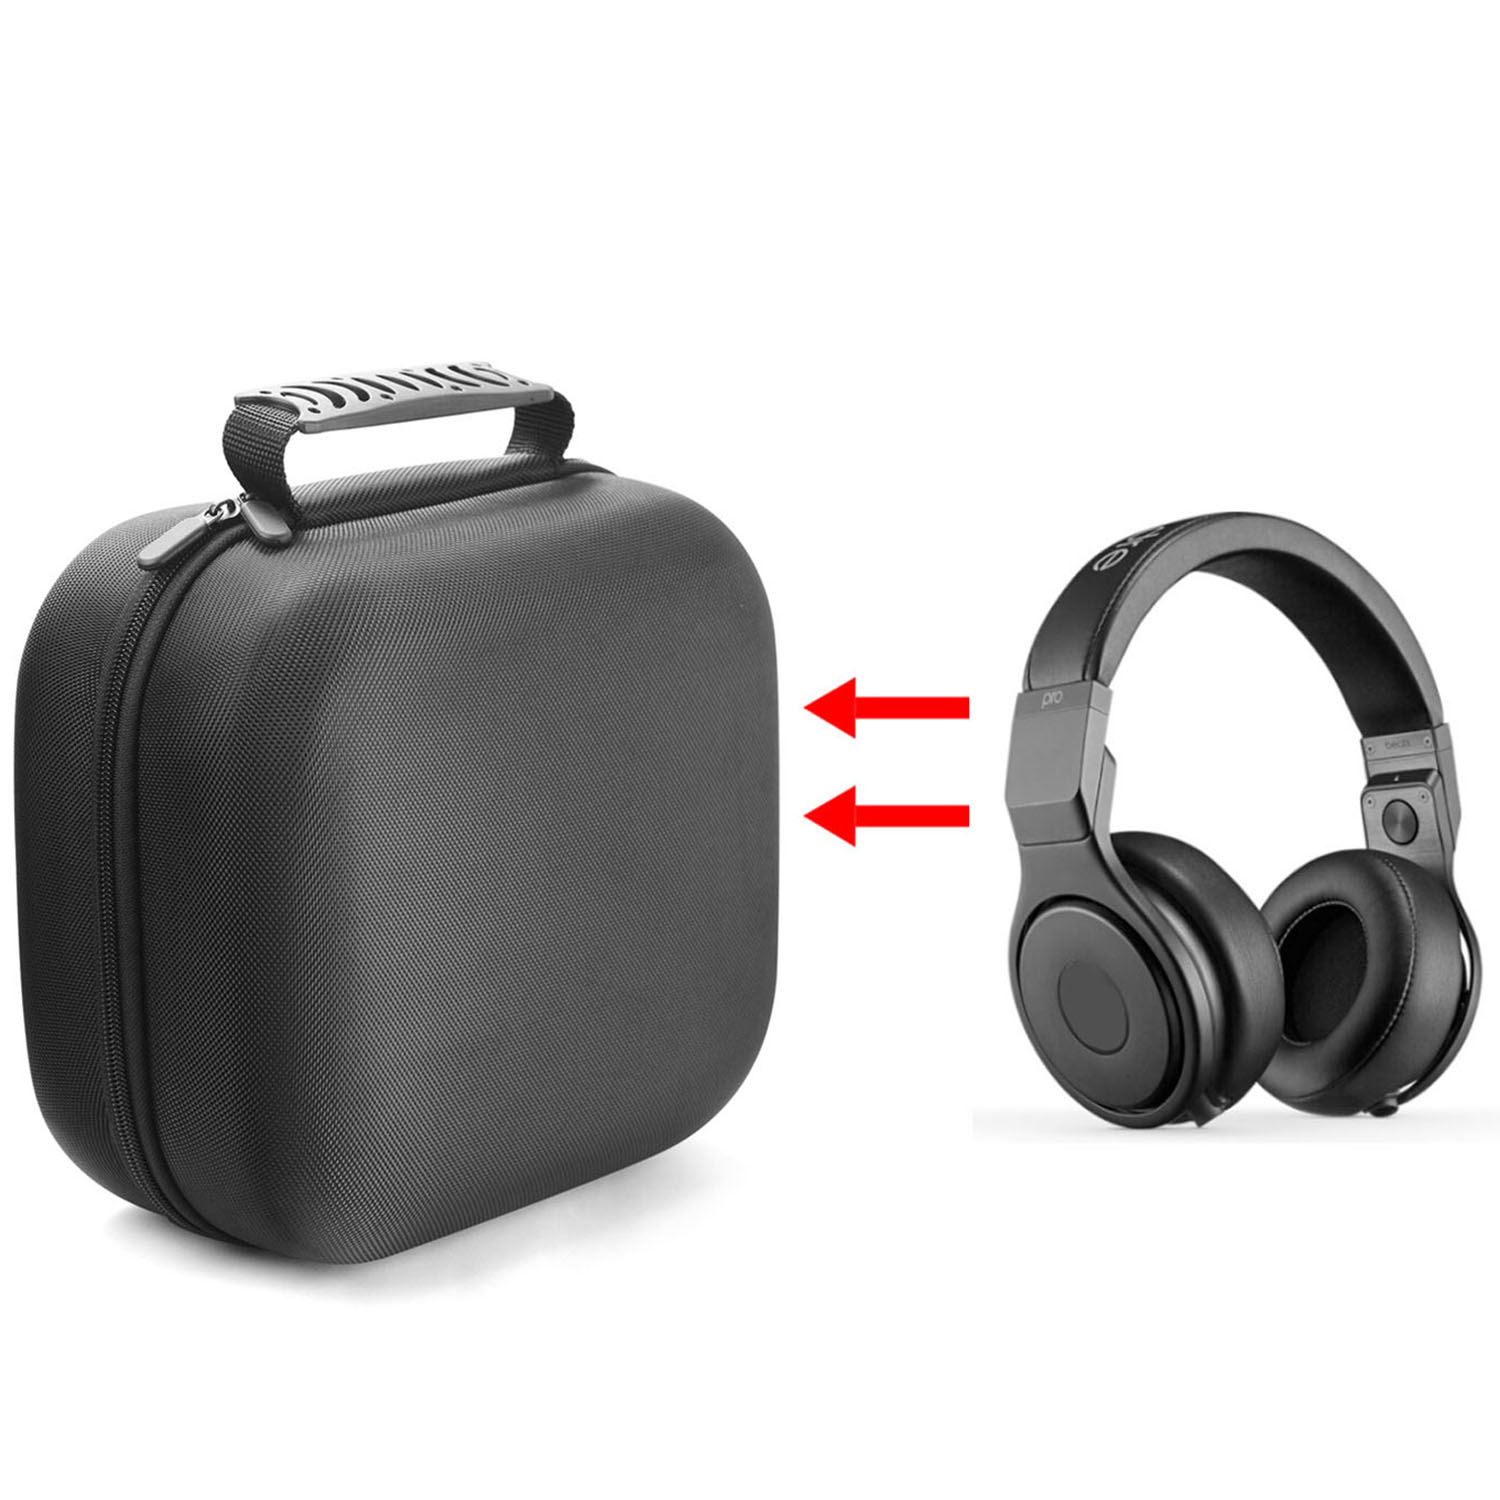 Bakeey-Earphone-Carrying-Case-Shockproof-Hard-Portable-Headphone-Storage-Bag-Protective-Box-for-Beat-1800698-1